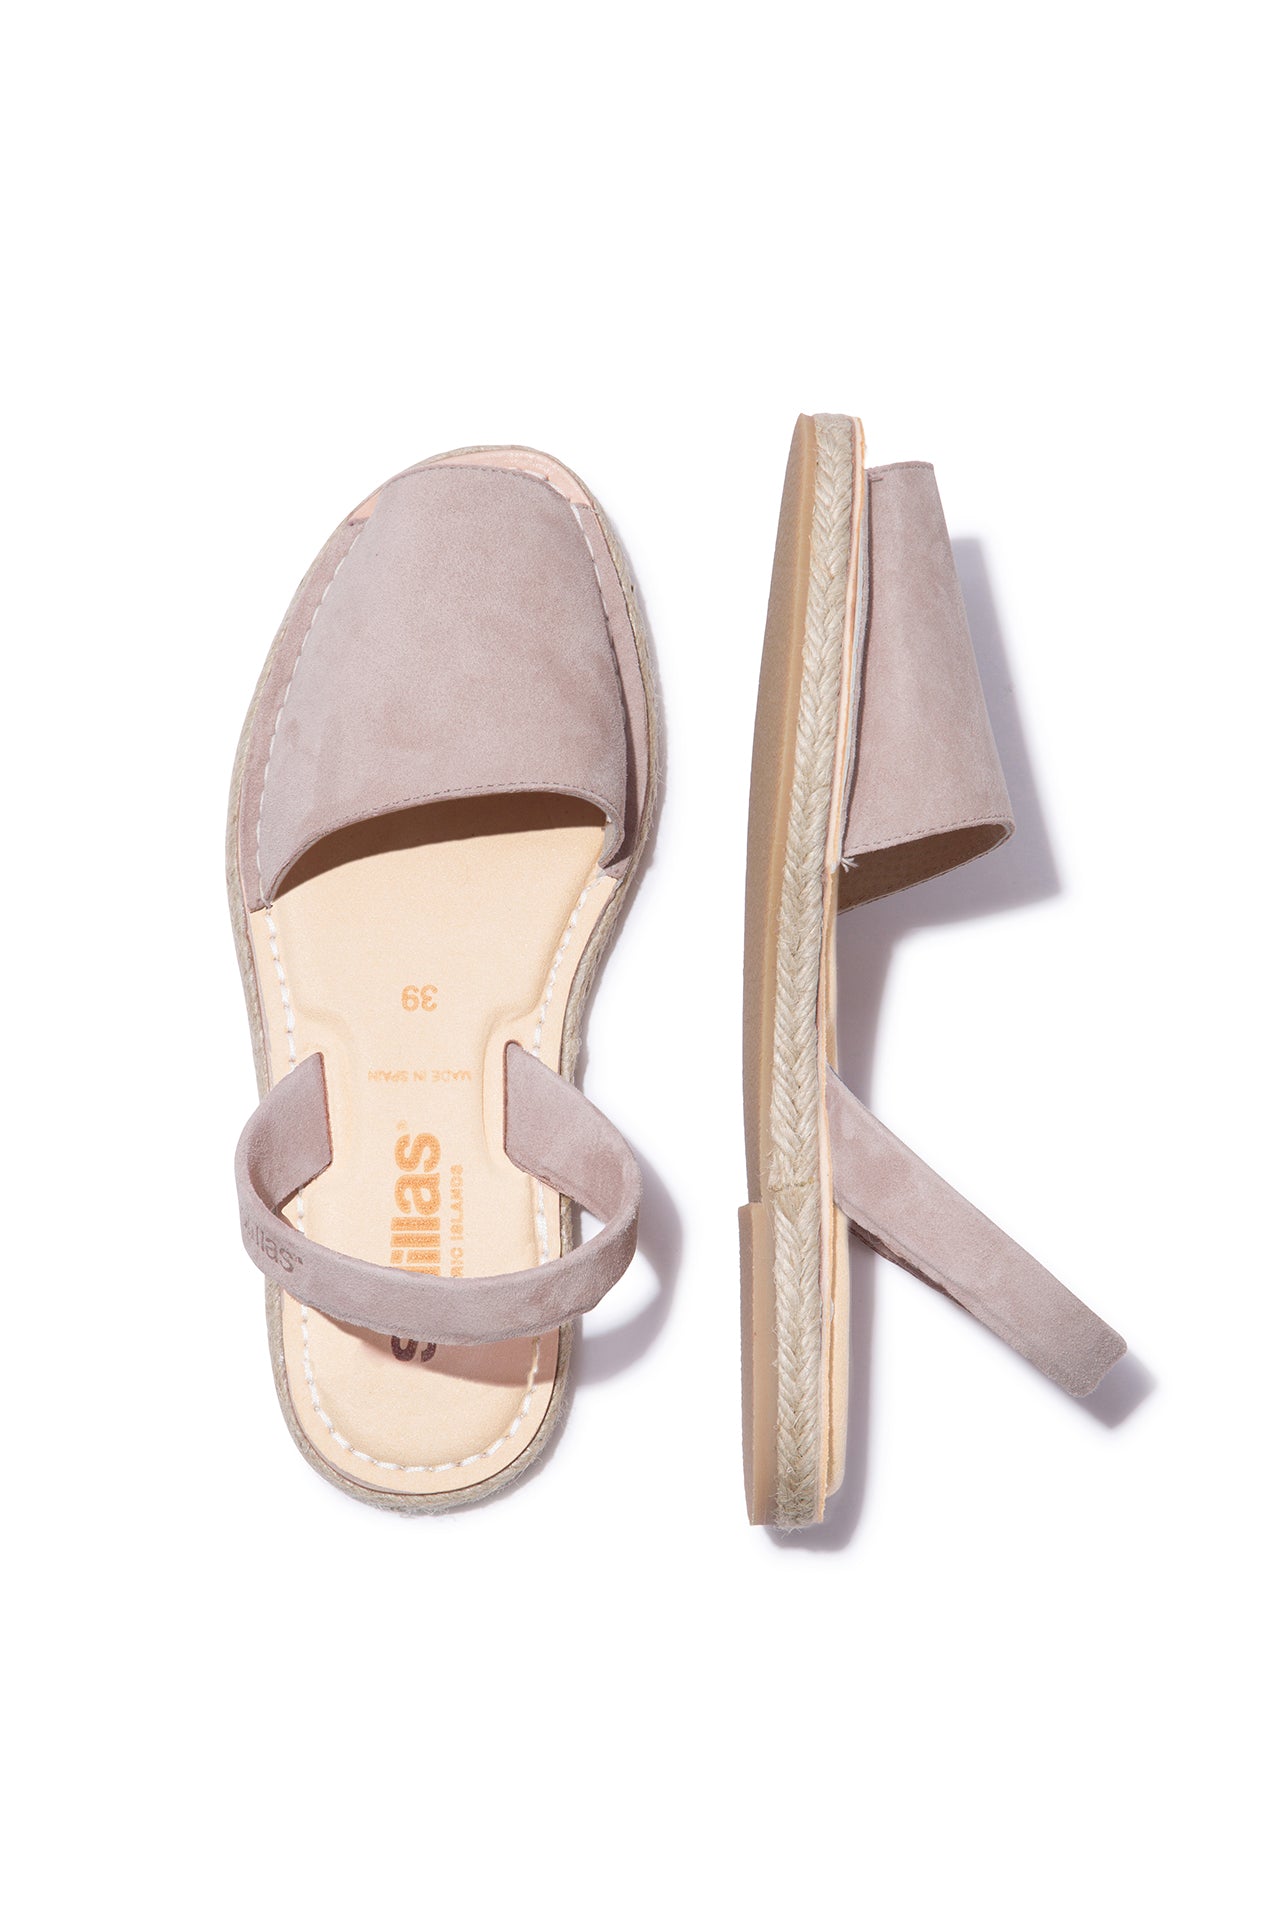 Pedra Mimoso - Espadrille Menorcan Sandals in Grey Leather